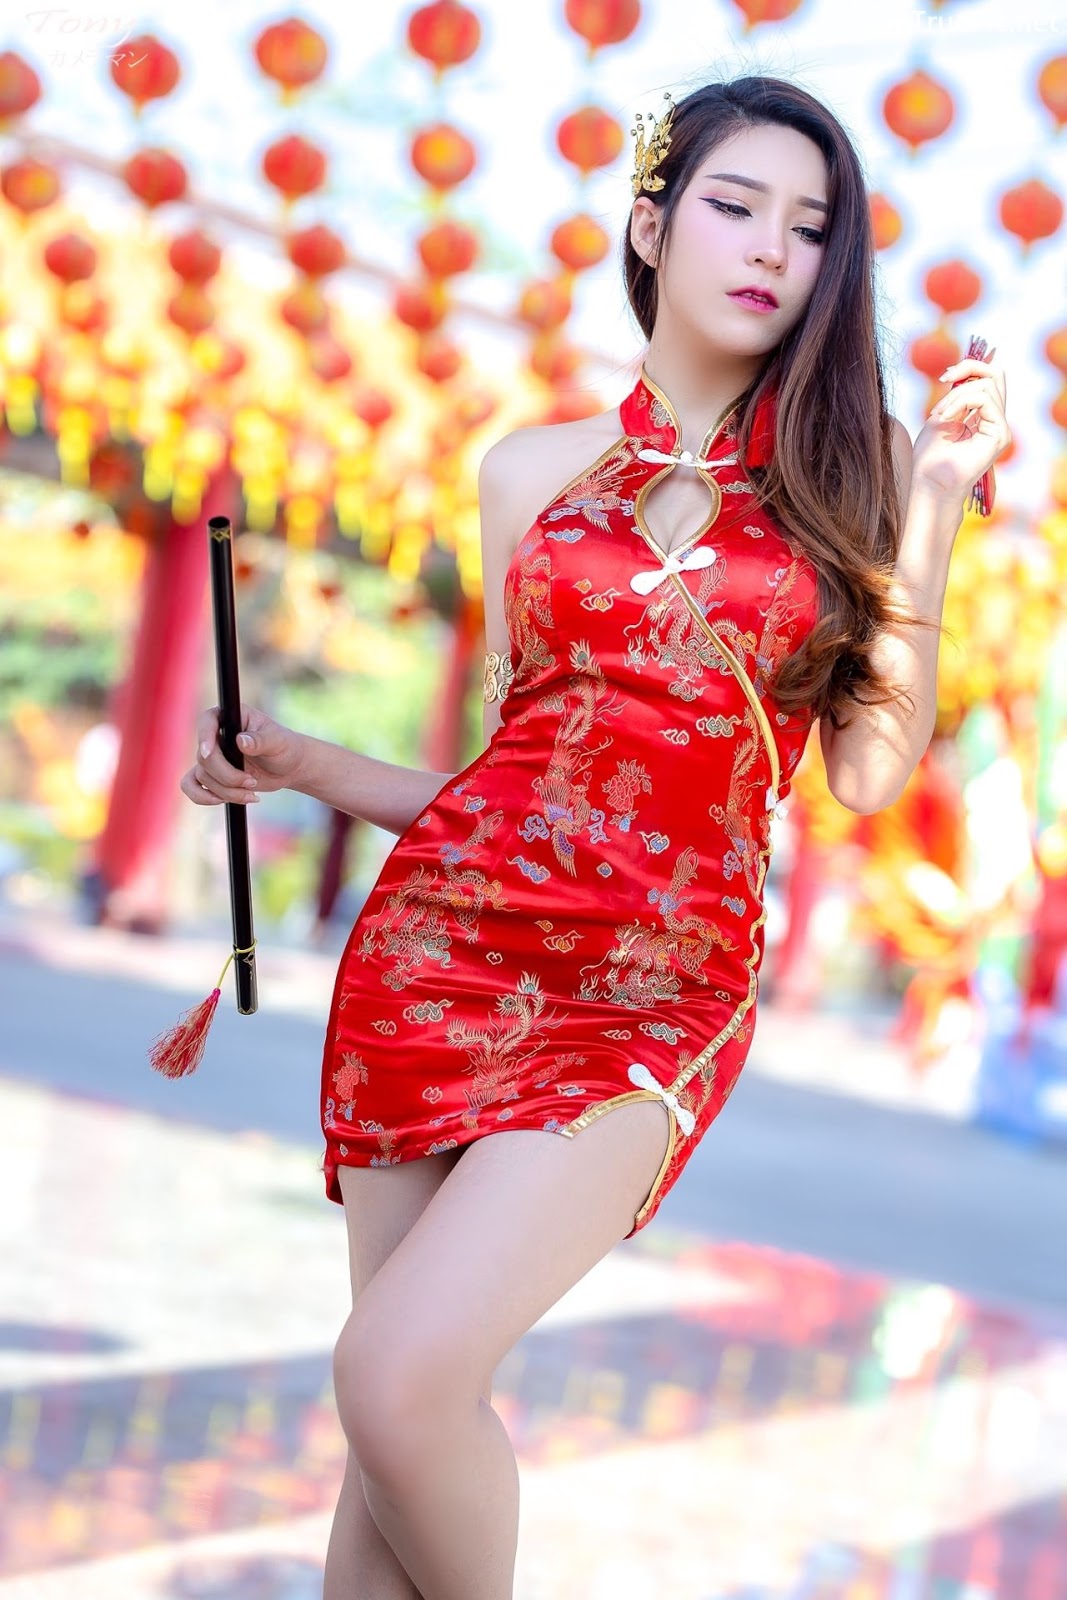 Image-Thailand-Hot-Model-Janet-Kanokwan-Saesim-Sexy-Chinese-Girl-Red-Dress-Traditional-TruePic.net- Picture-13